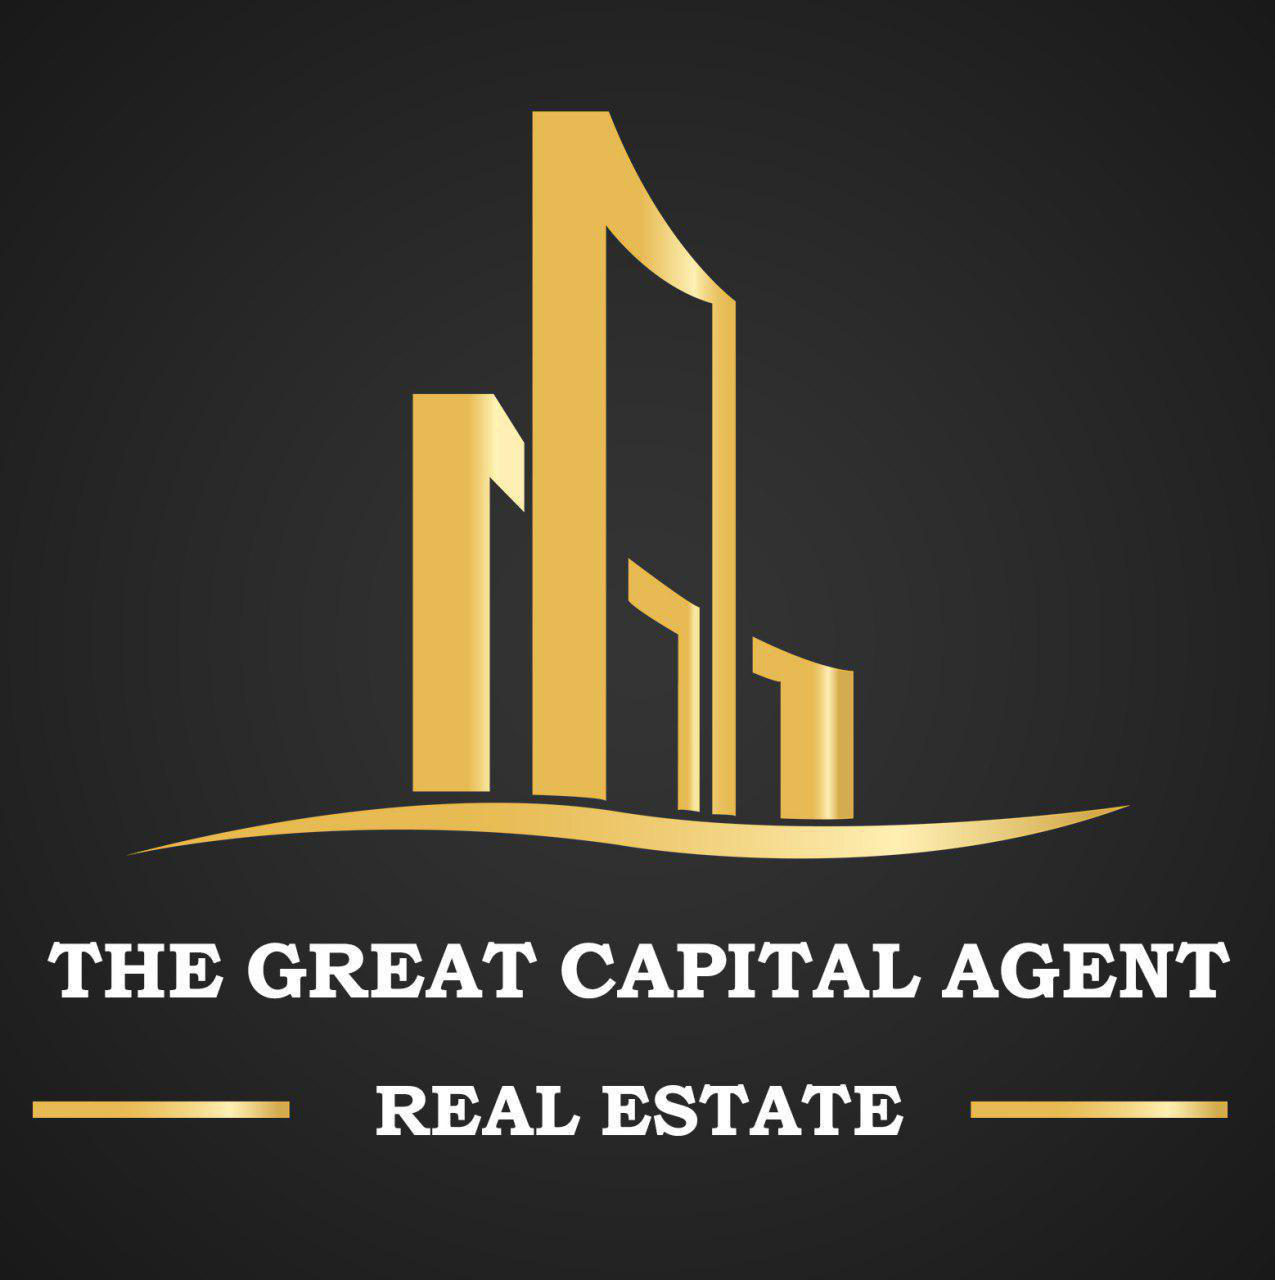 The Great Capital Agent